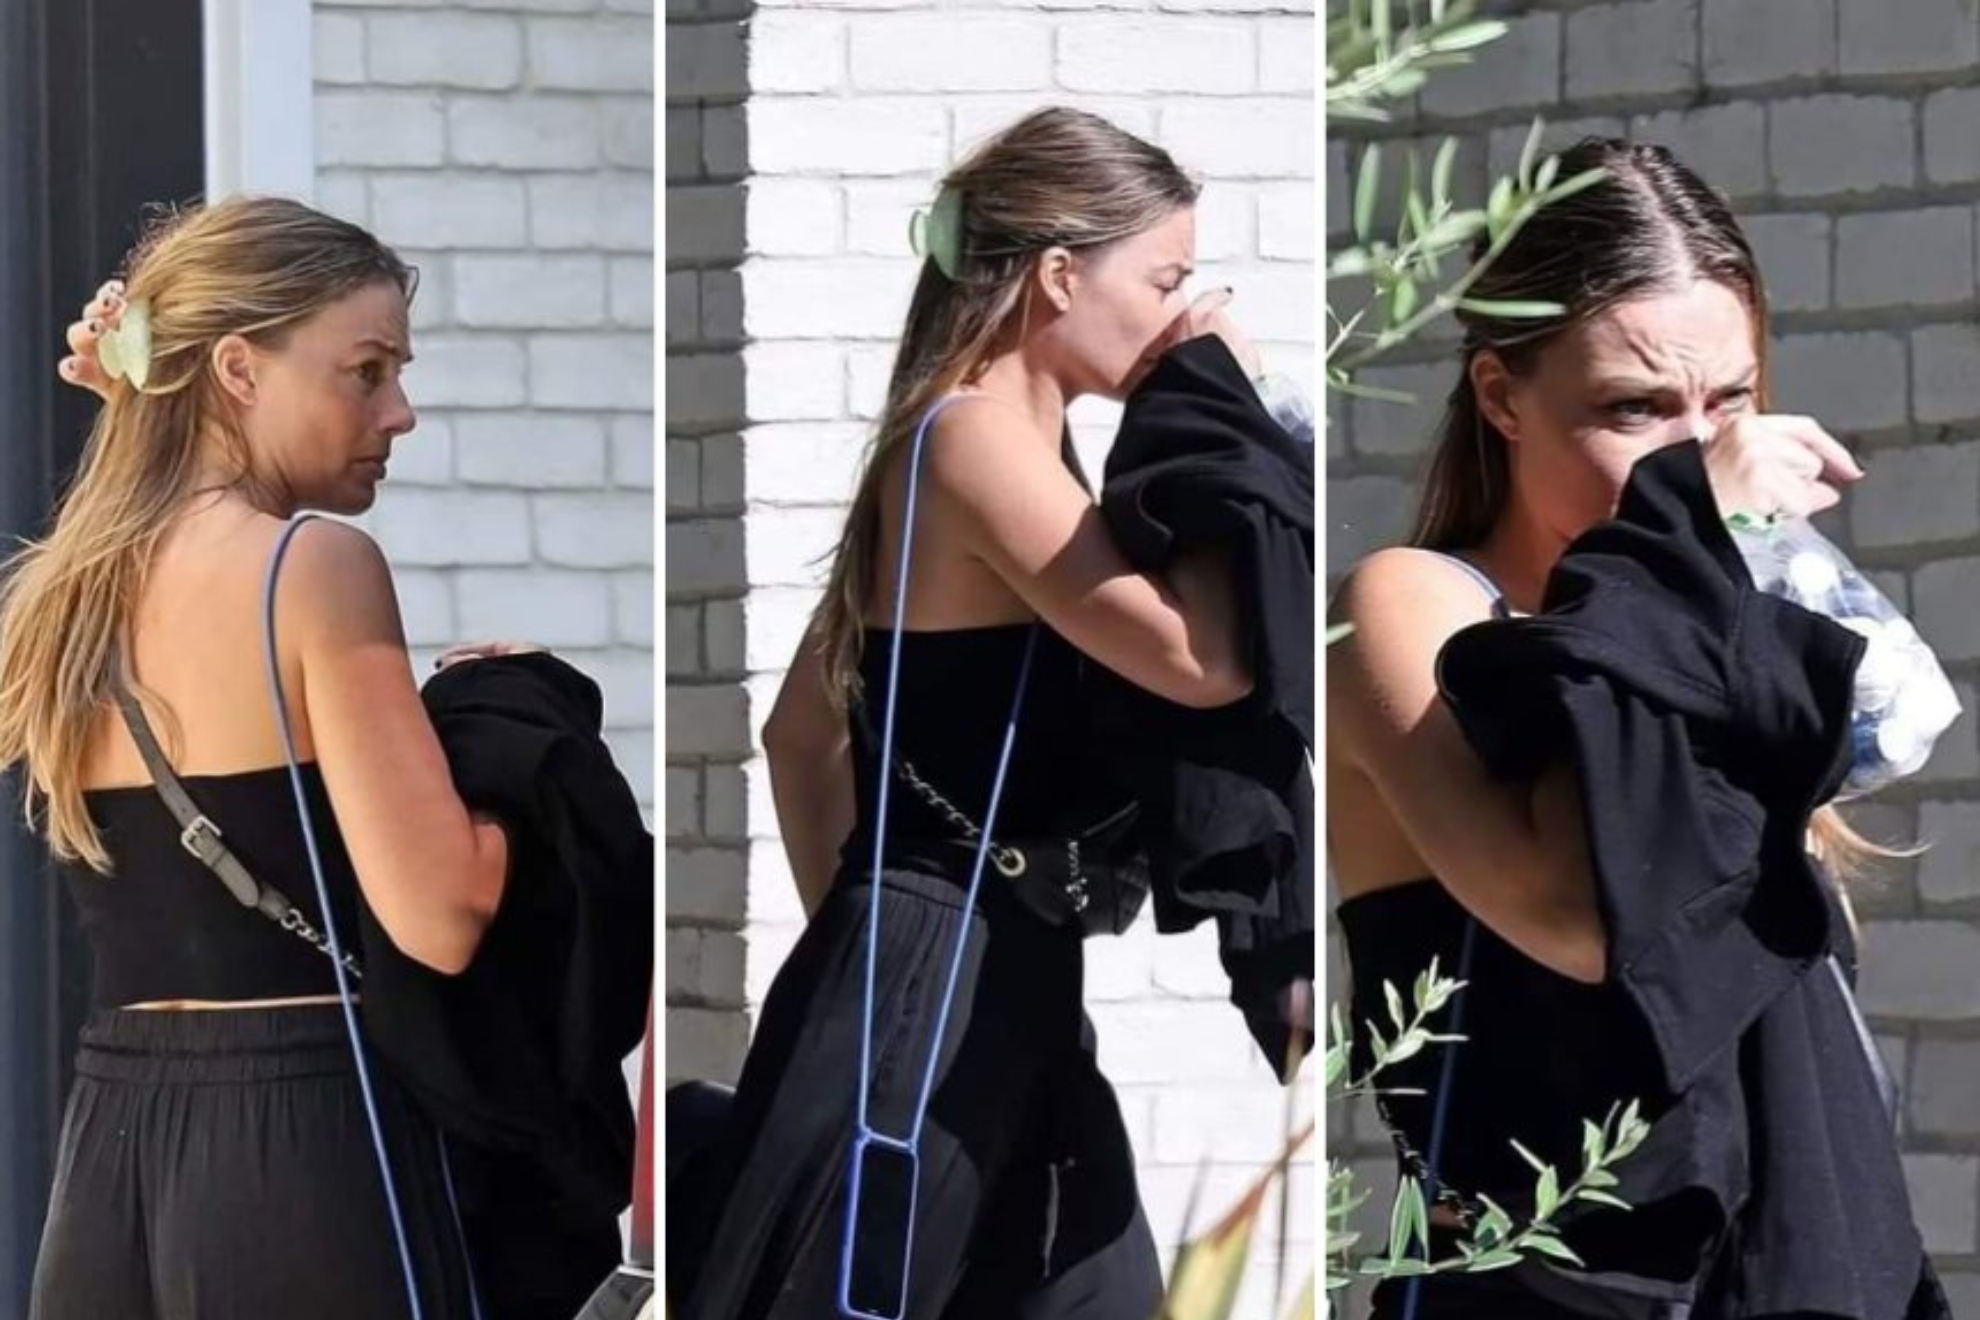 Margot Robbie seems very distressed after visiting Cara Delevingne (Twitter @dailymail)